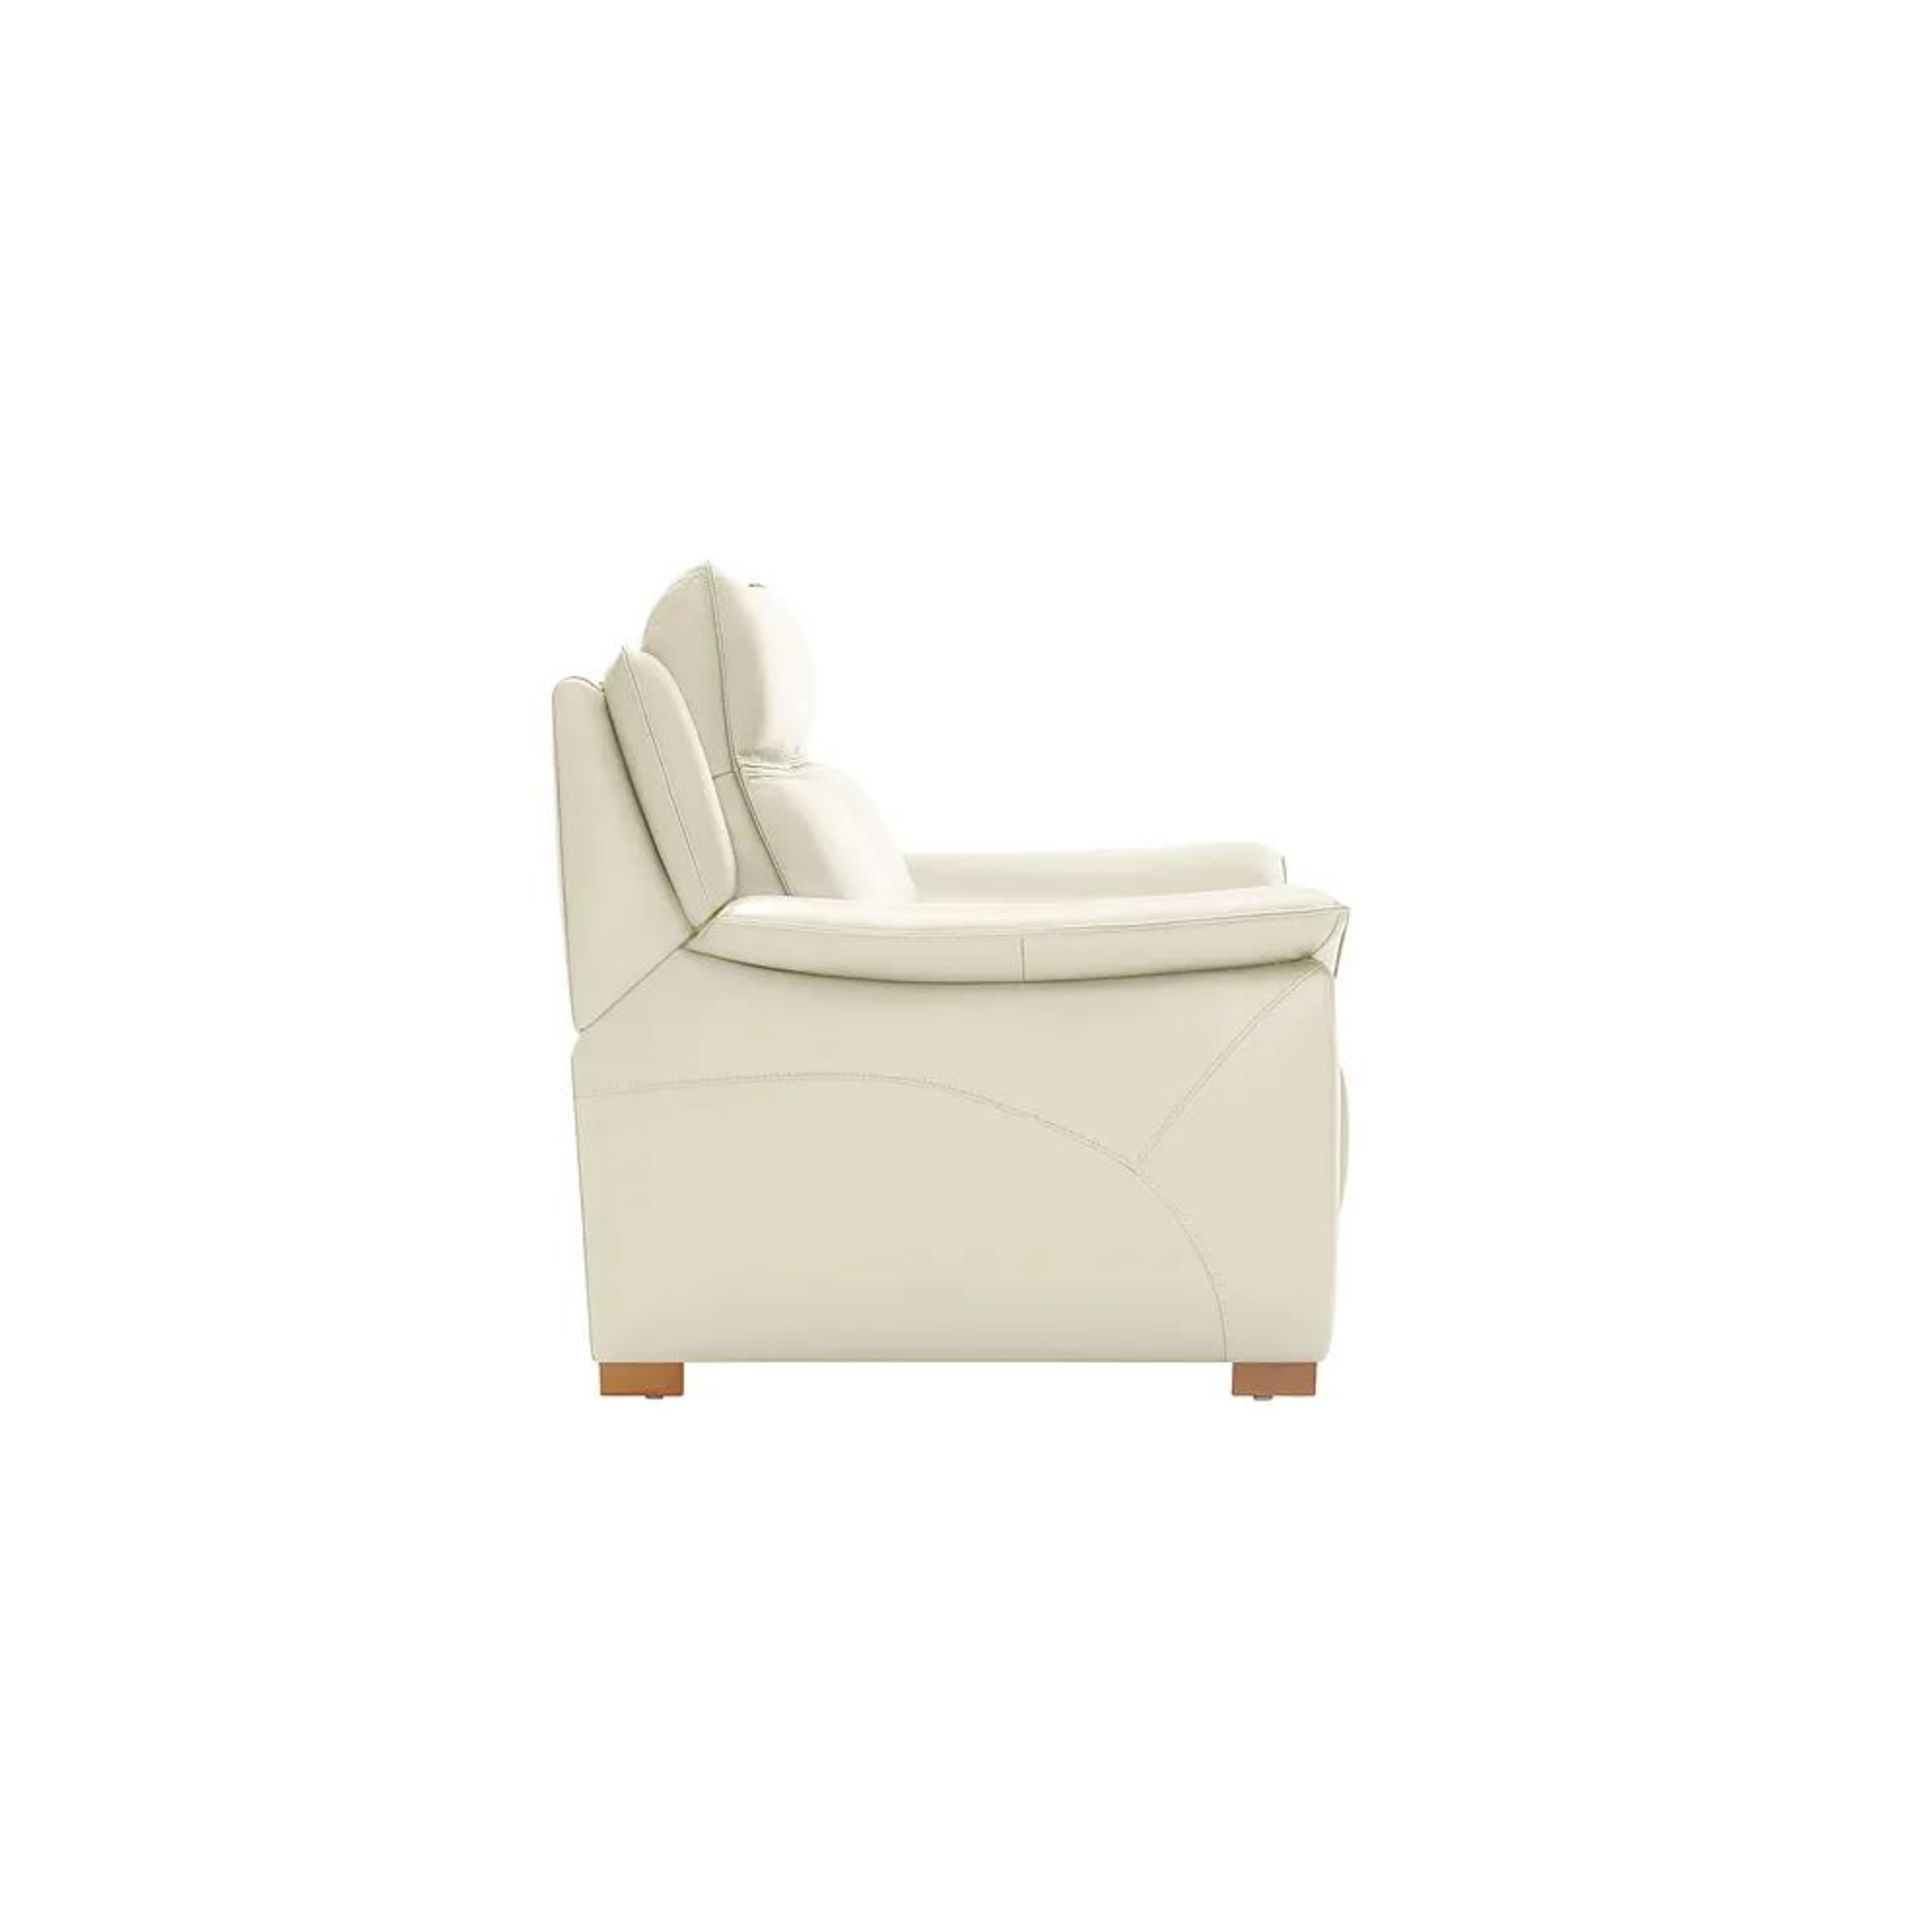 BRAND NEW DUNE 2 Seater Sofa - SNOW WHITE LEATHER. RRP £1579. Pairing comfort with classic design, - Image 4 of 8